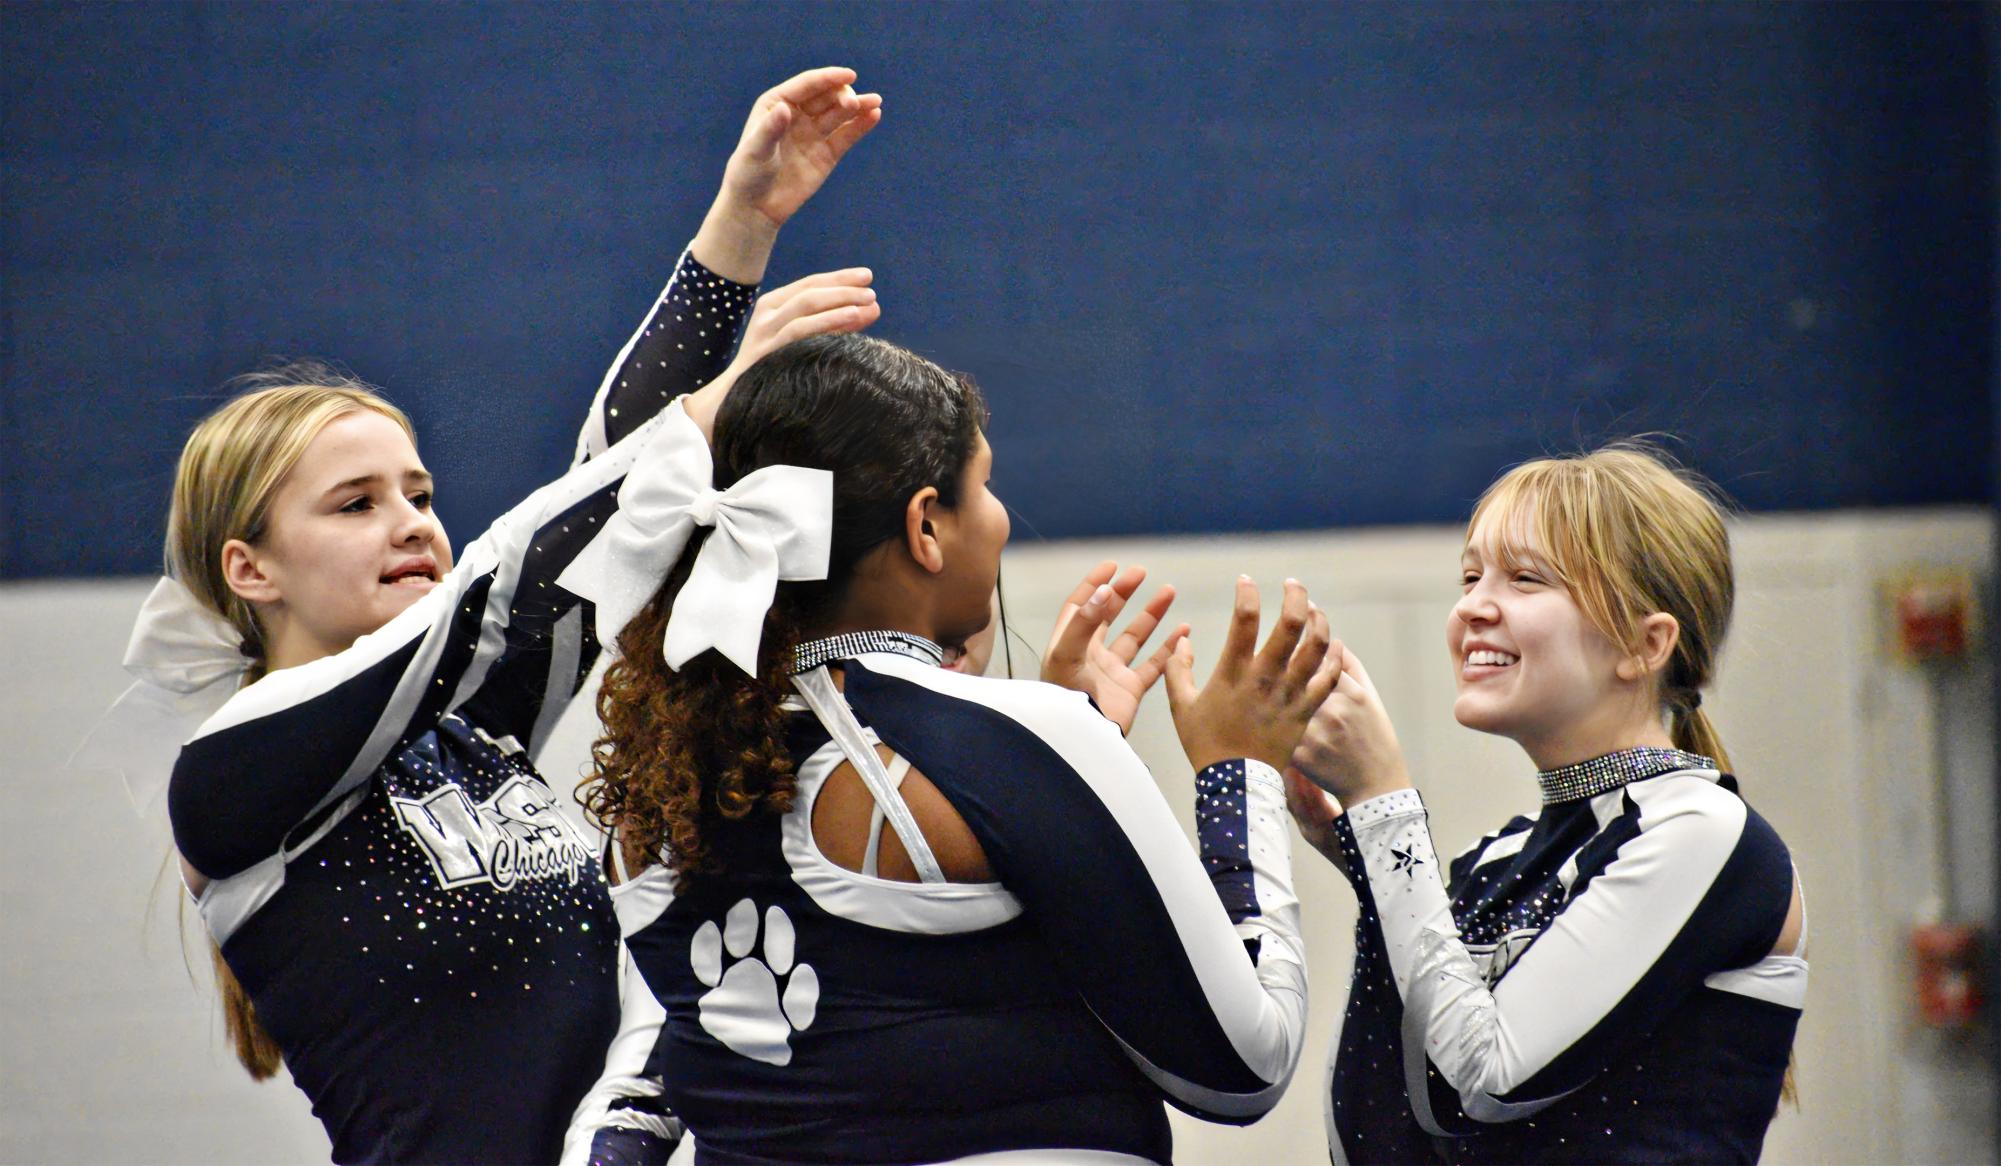 Cheerleaders congratulate each other on a well-done routine.